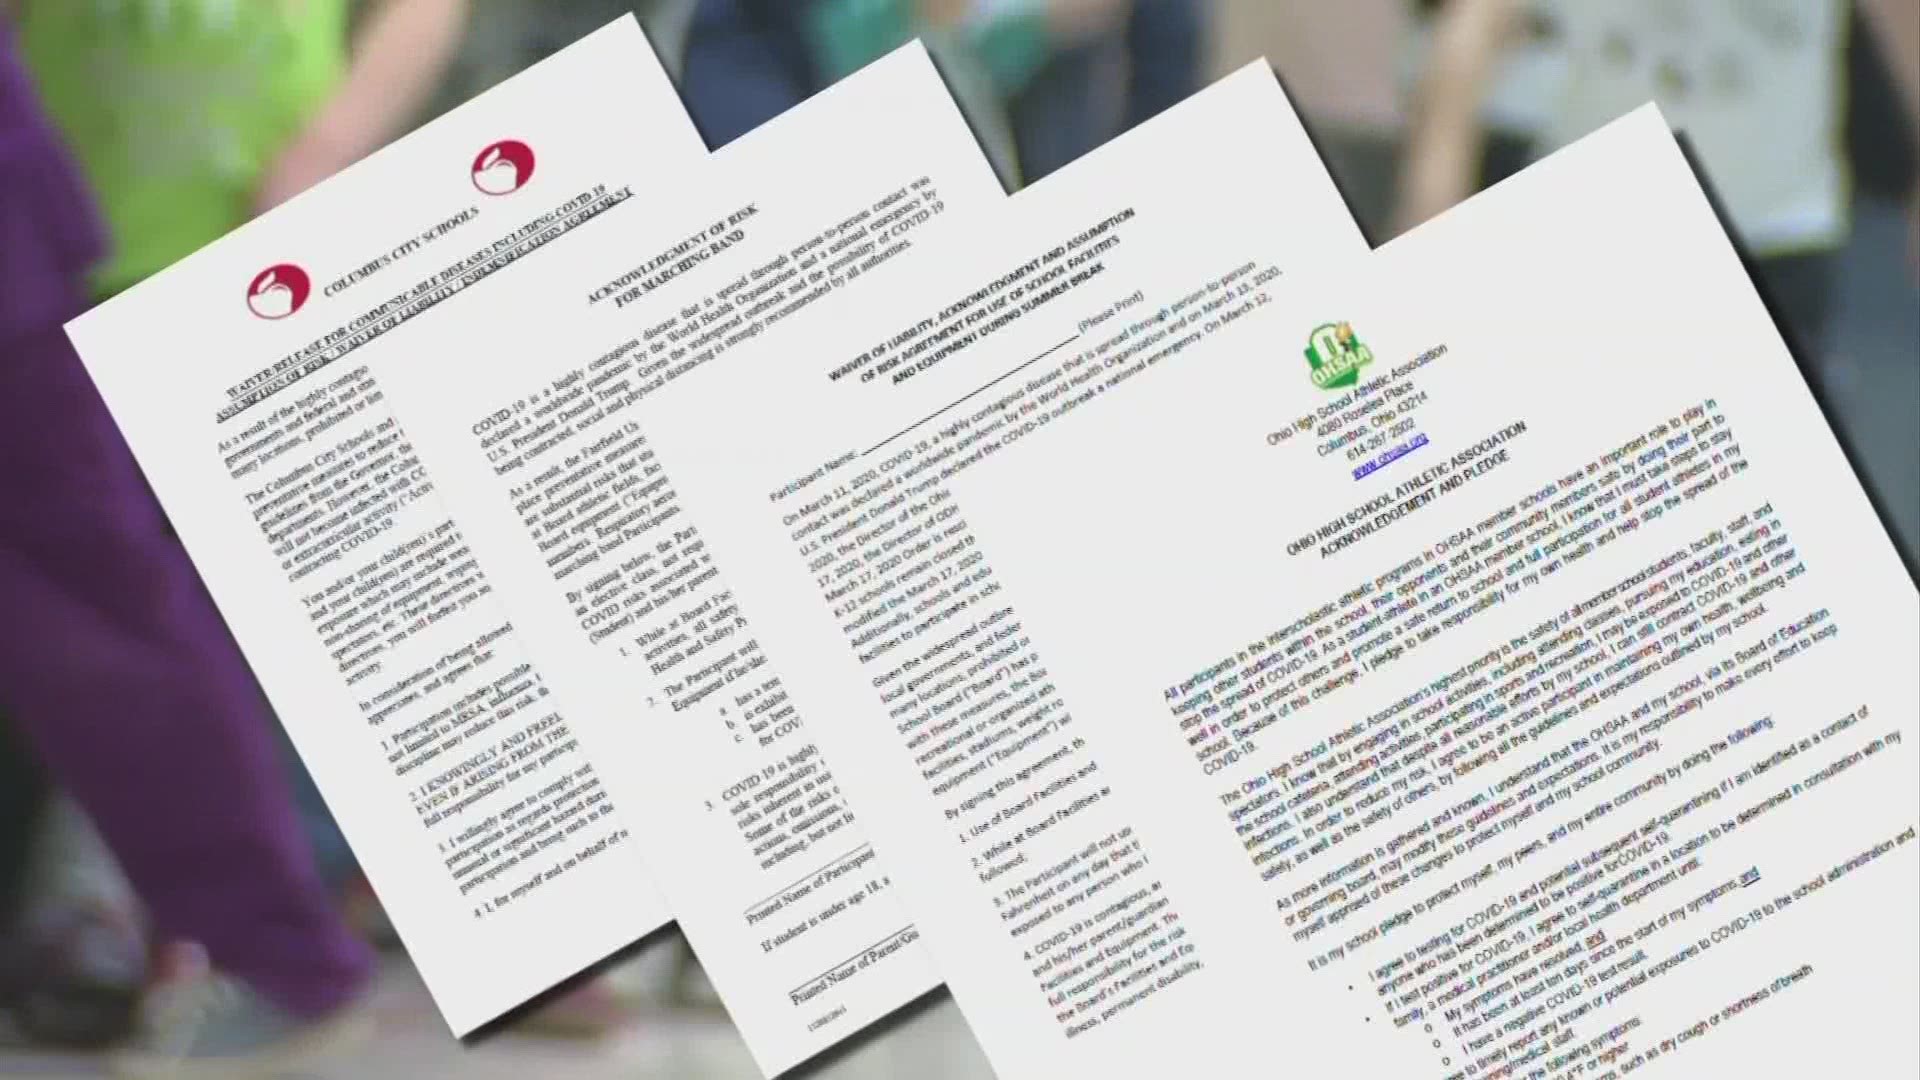 Some school districts are asking parents and students to sign liability waivers.